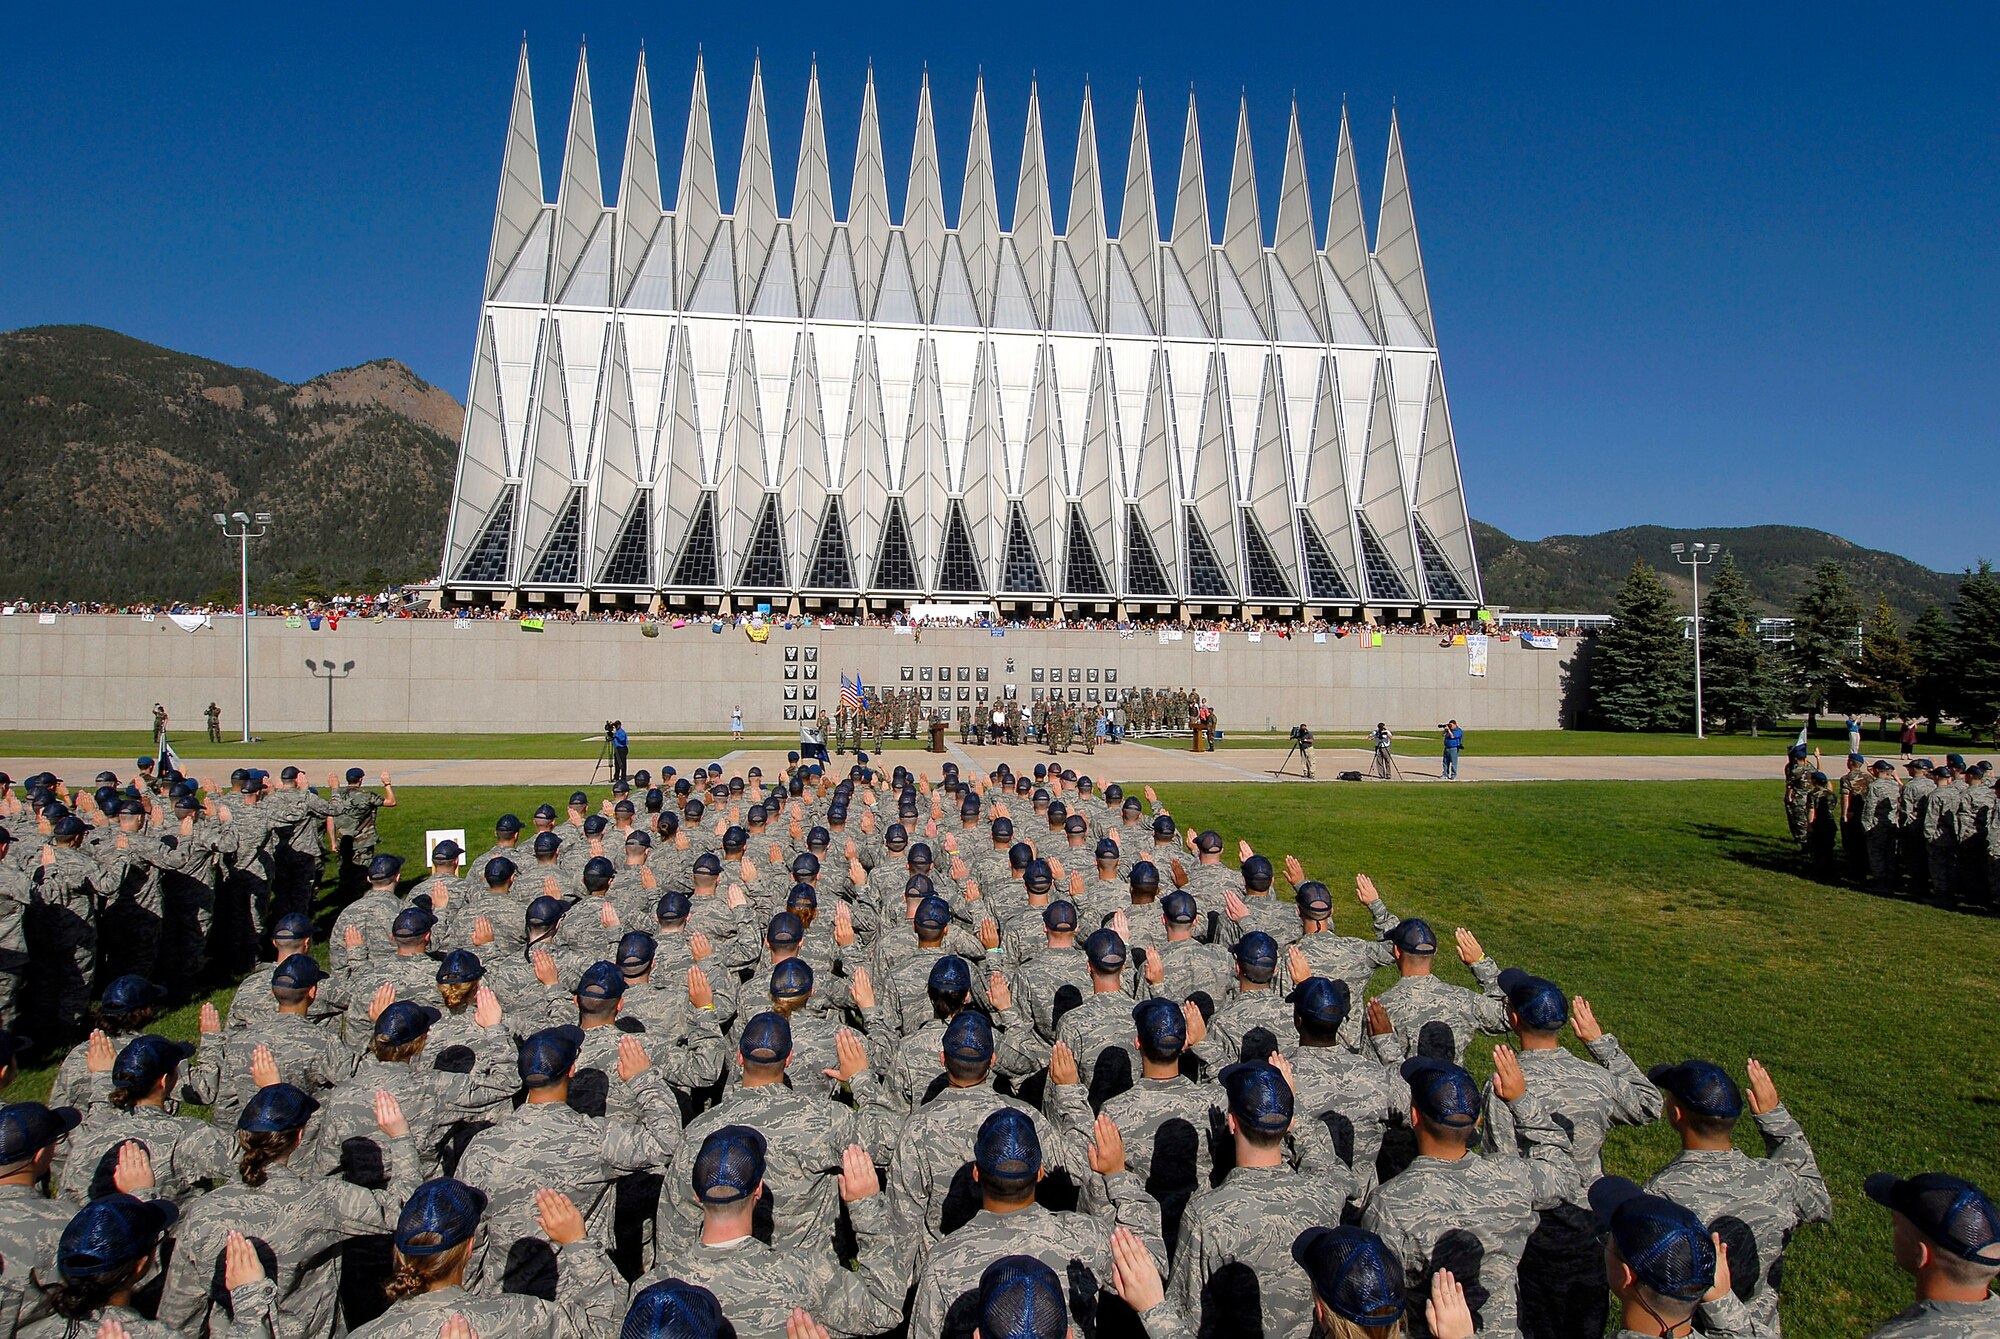 The 1,346 basic cadet trainees of the Class of 2012 are sworn in June 27 at the U.S. Air Force Academy in Colorado. Out of the 1,300 slots in the next class of cadets, the Academy has set aside 85 slots for qualified active-duty personnel, and another 85 slots for qualified Guard and Reserve members. Deadline for application is Jan. 31, 2009 and details are available at www.academyadmissions.com or from the base education office.  (U.S. Air Force photo/Mike Kaplan)
